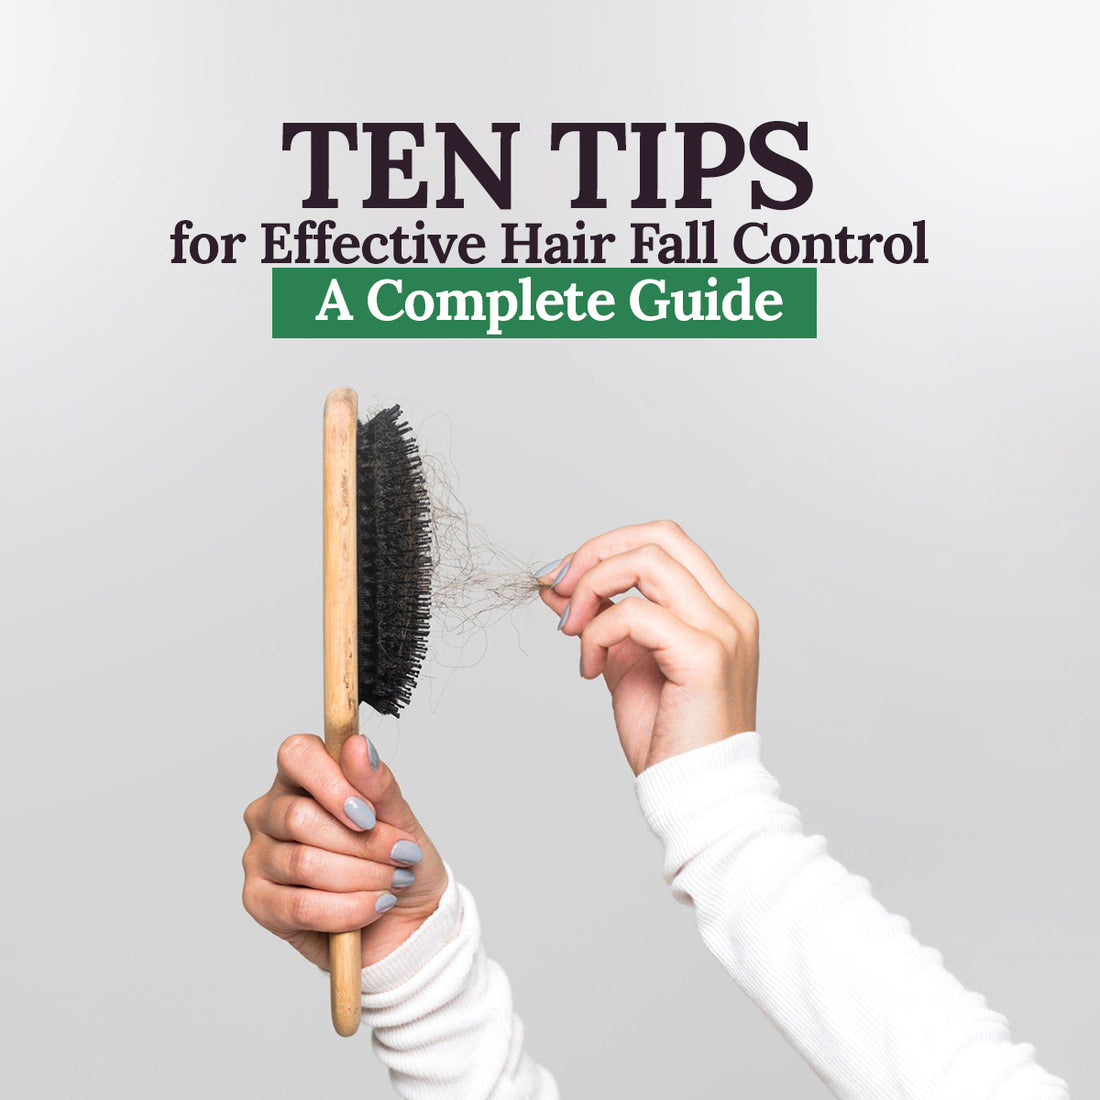 Ten Tips for Effective Hair Fall Control: A Complete Guide